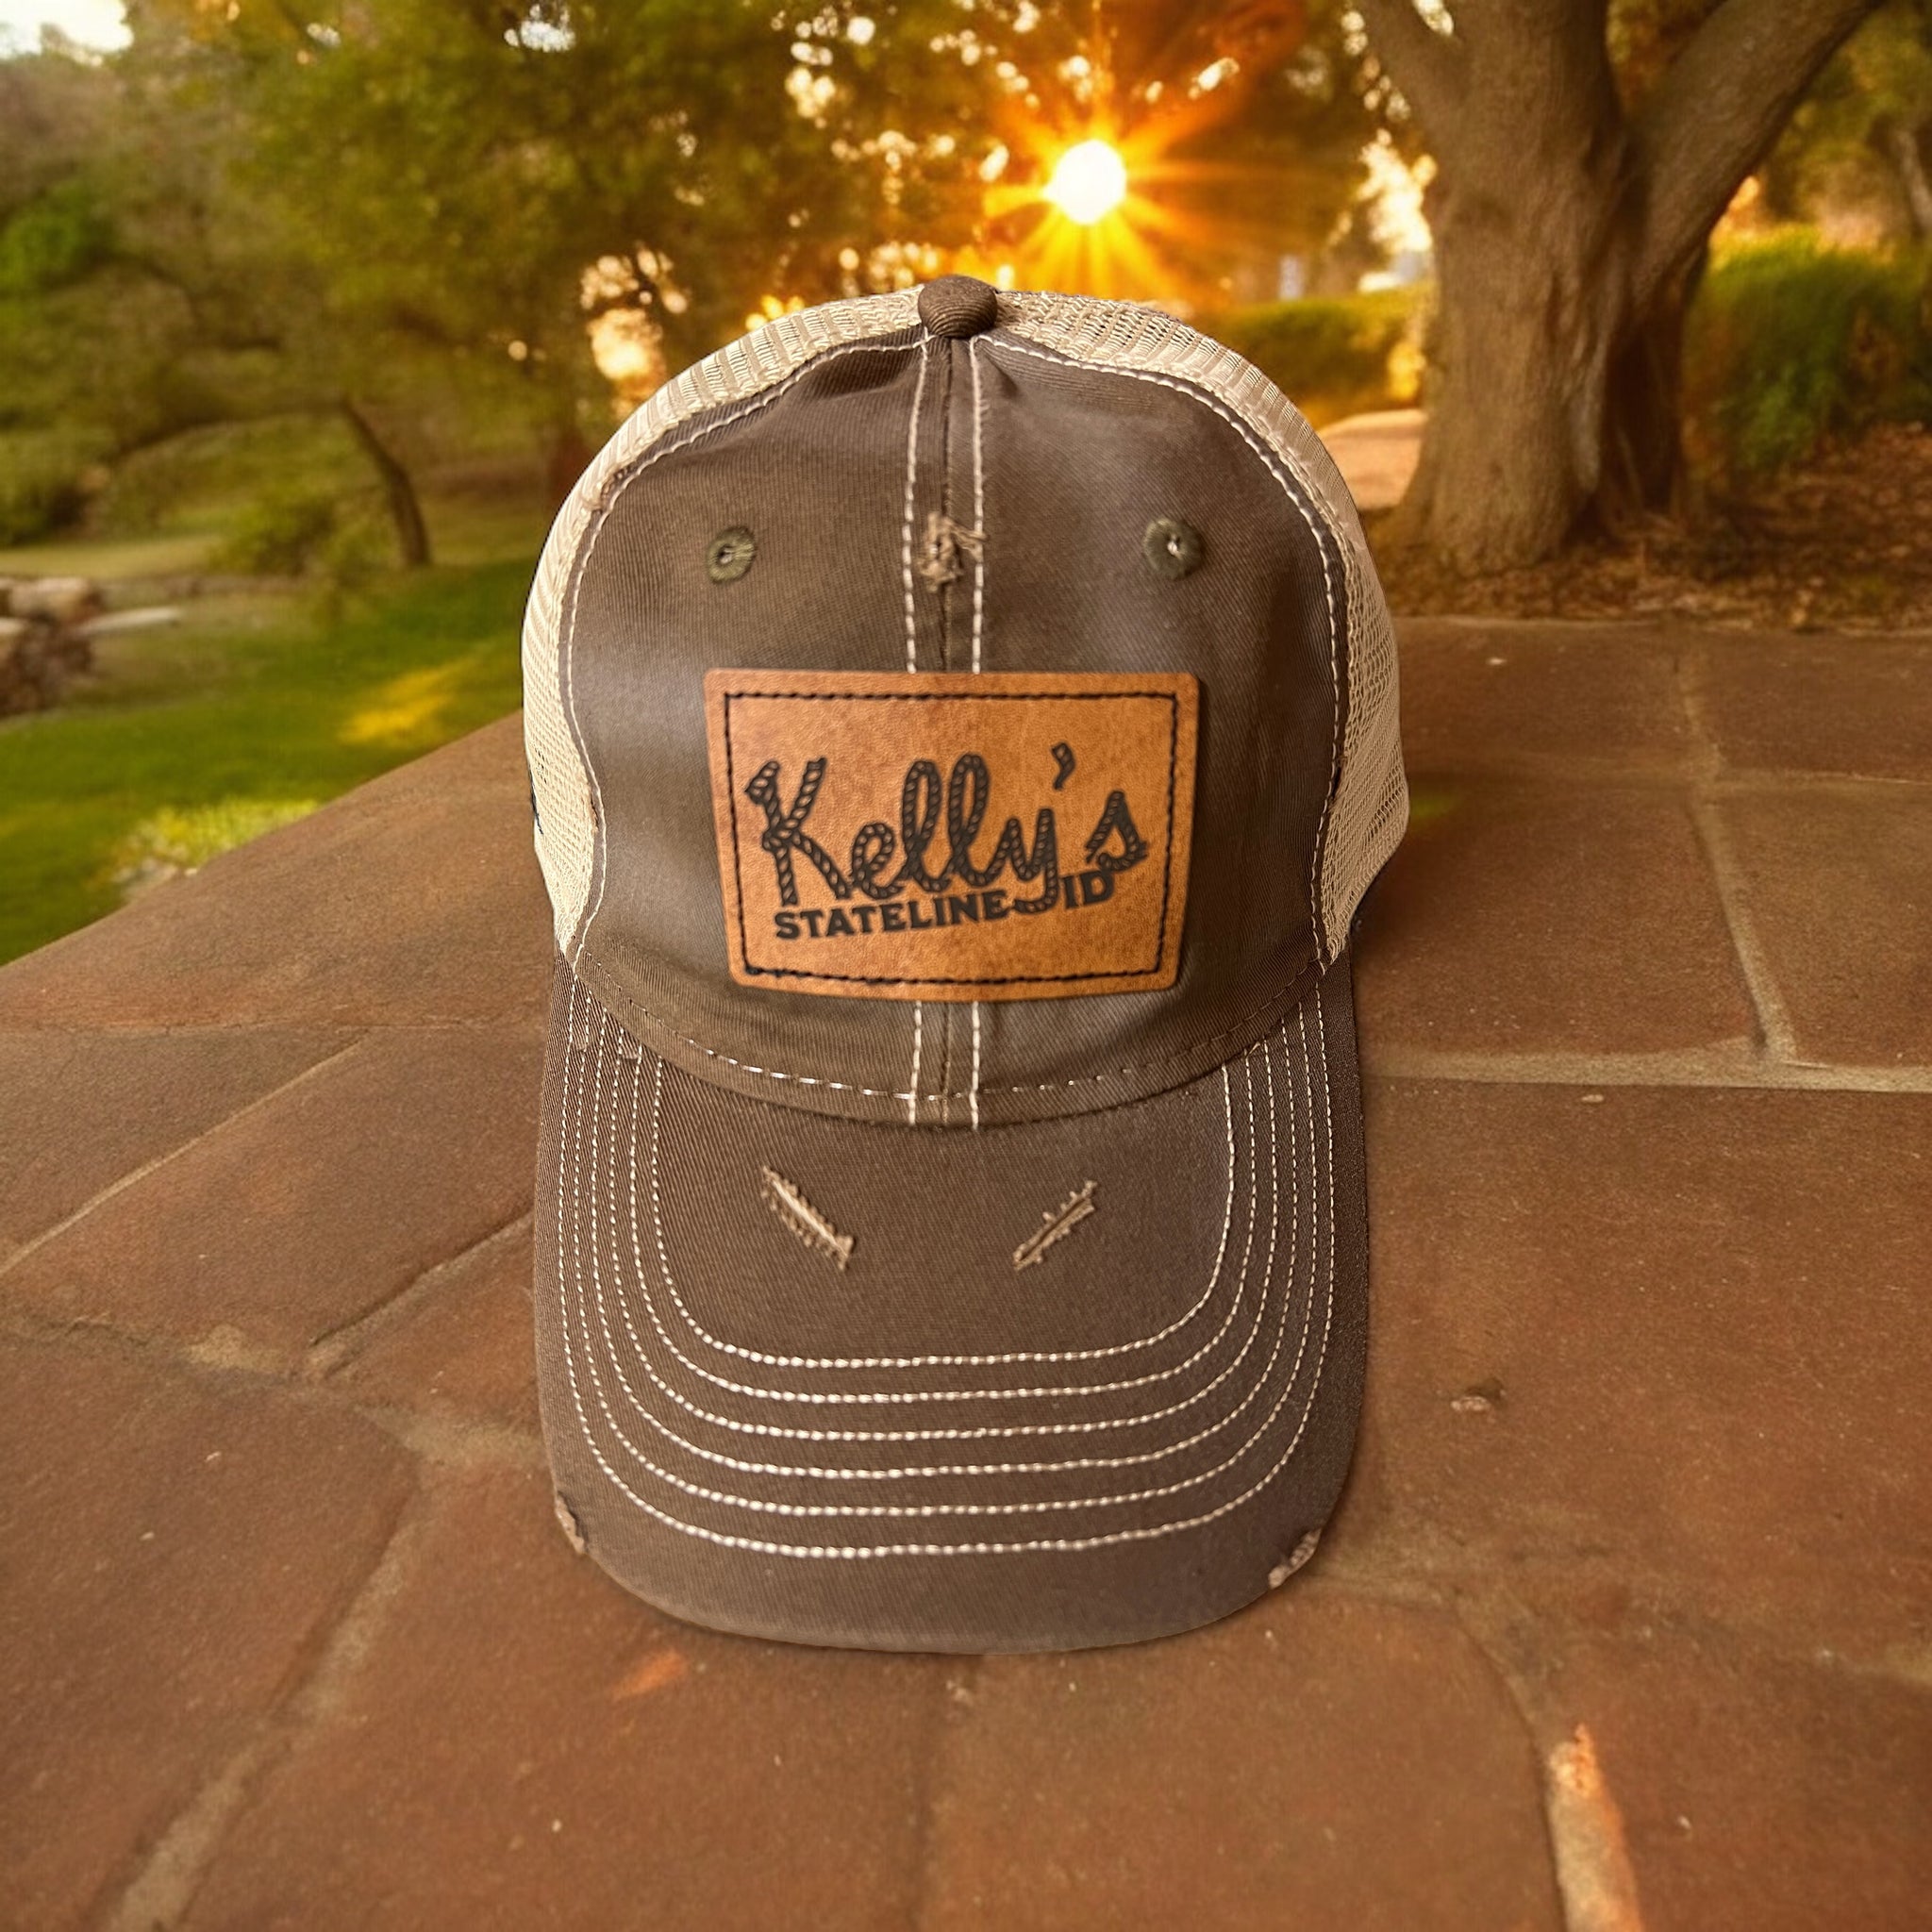 : Image of Kelly's Stateline Bounty Dirty-Washed Cap in Fatigue/Khaki, featuring a vintage-inspired dirty-washed design, perfect for showcasing style and adventure with durable construction and a comfortable fit.